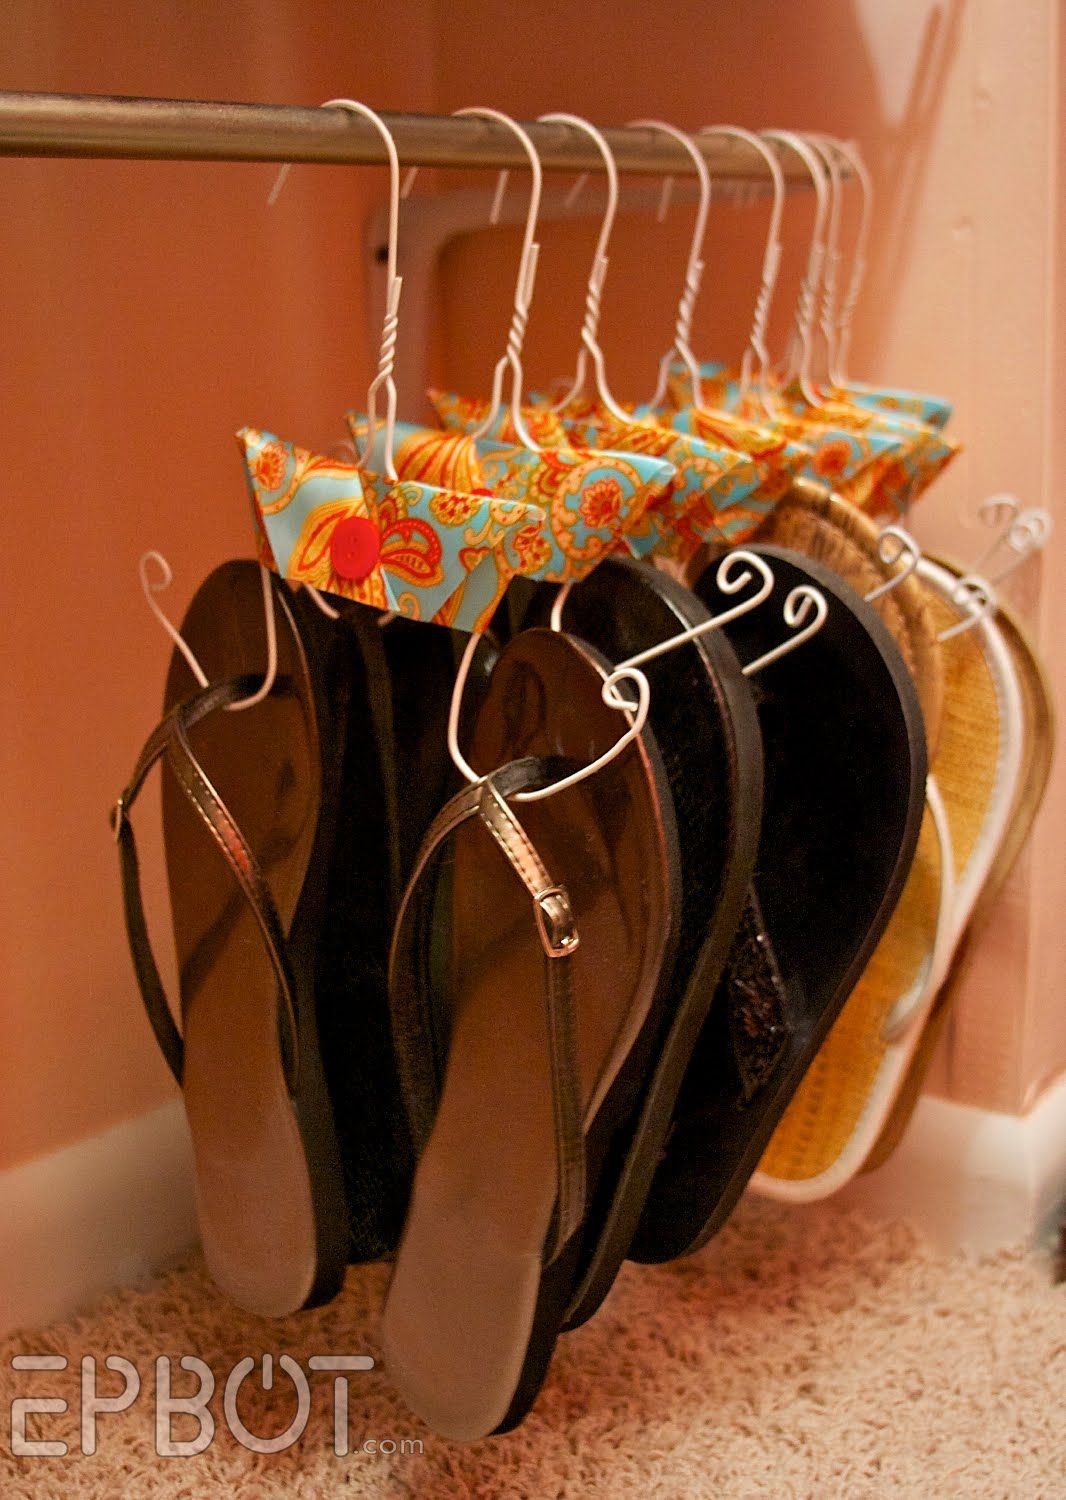 Simplify Organizing Your Shoes: Jen from Epbot shows us a very inexpensive way t